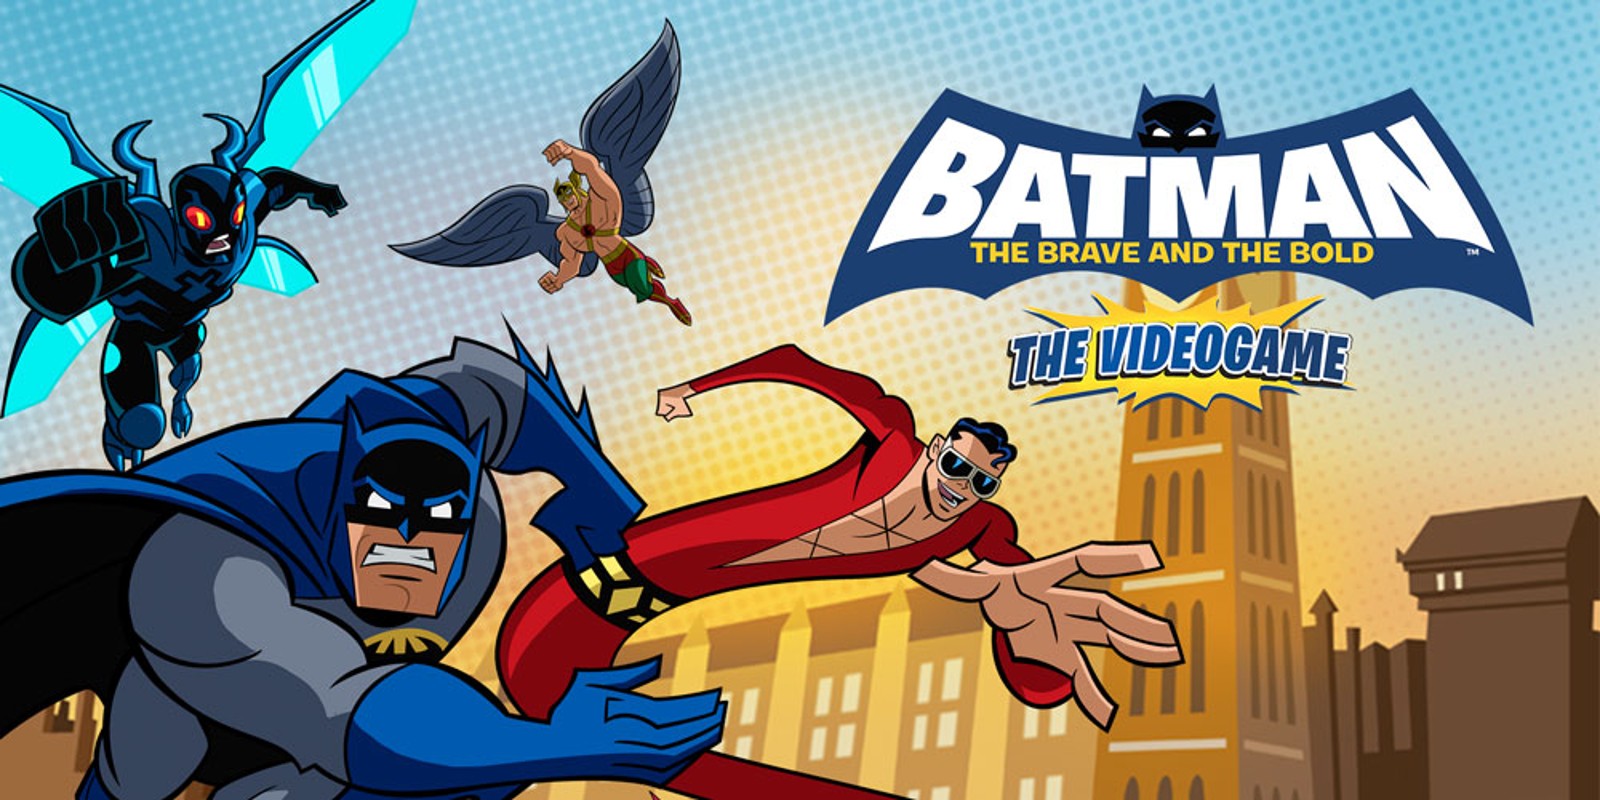 Batman: The Brave and the Bold - The Videogame | Wii | Games | Nintendo